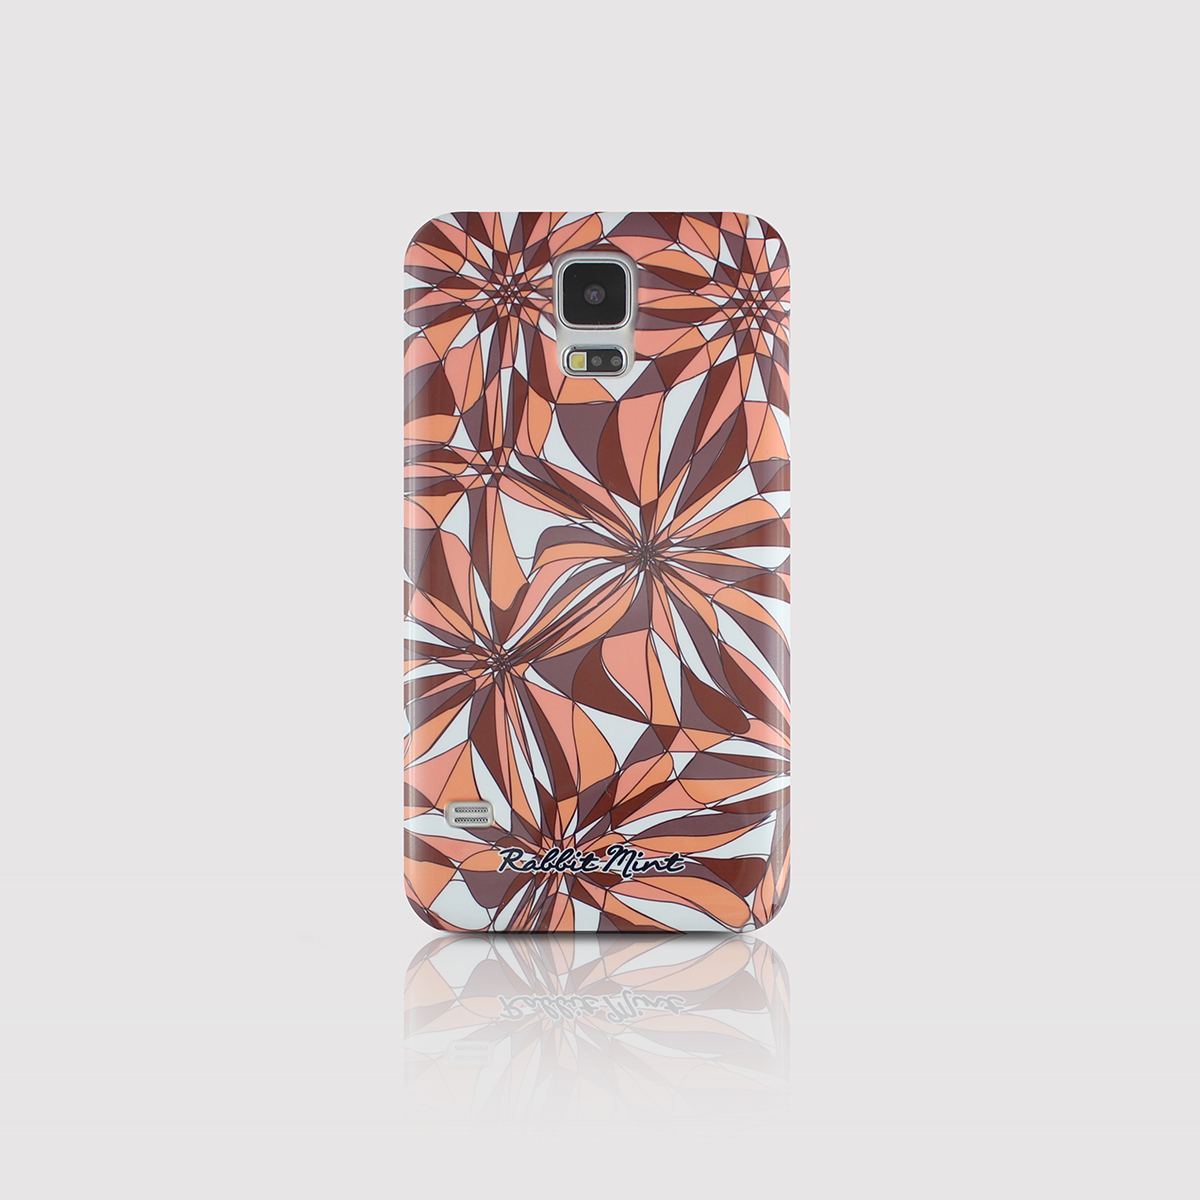 Samsung Galaxy S5 Case - Water Lily (p00004)